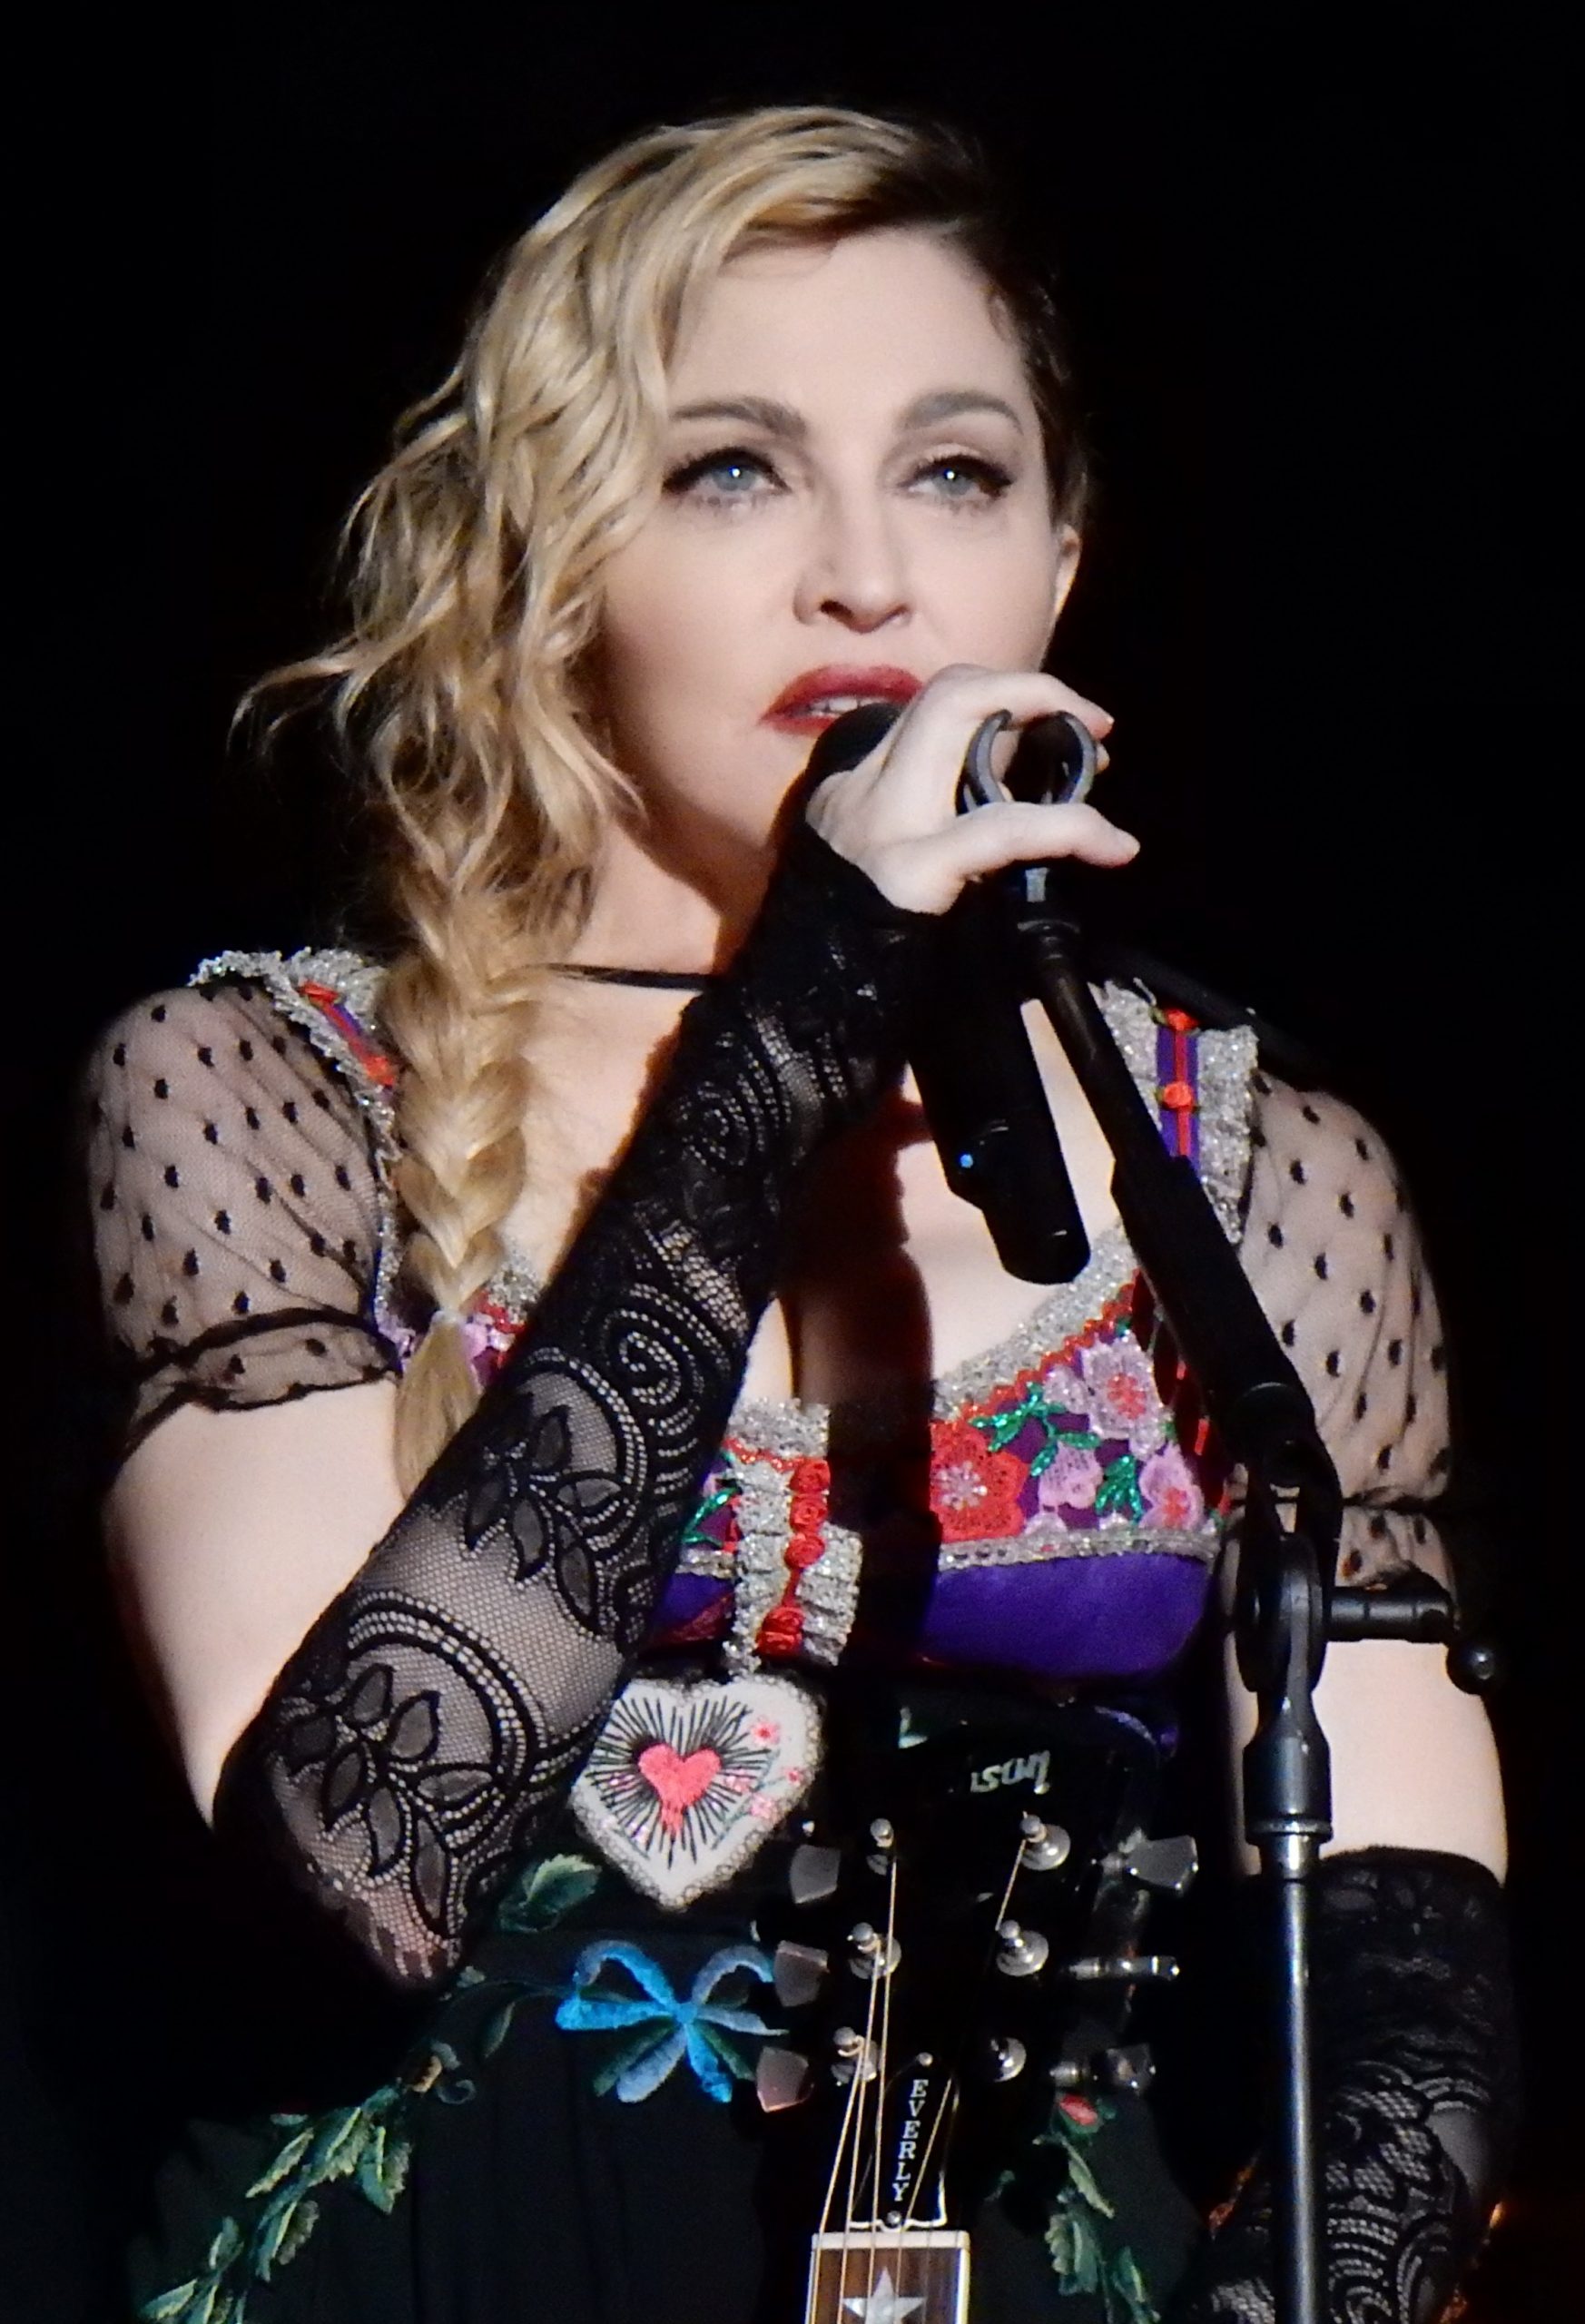 movie-news-madonna-spent-several-days-in-icu-after-being-found-unresponsive-manager1